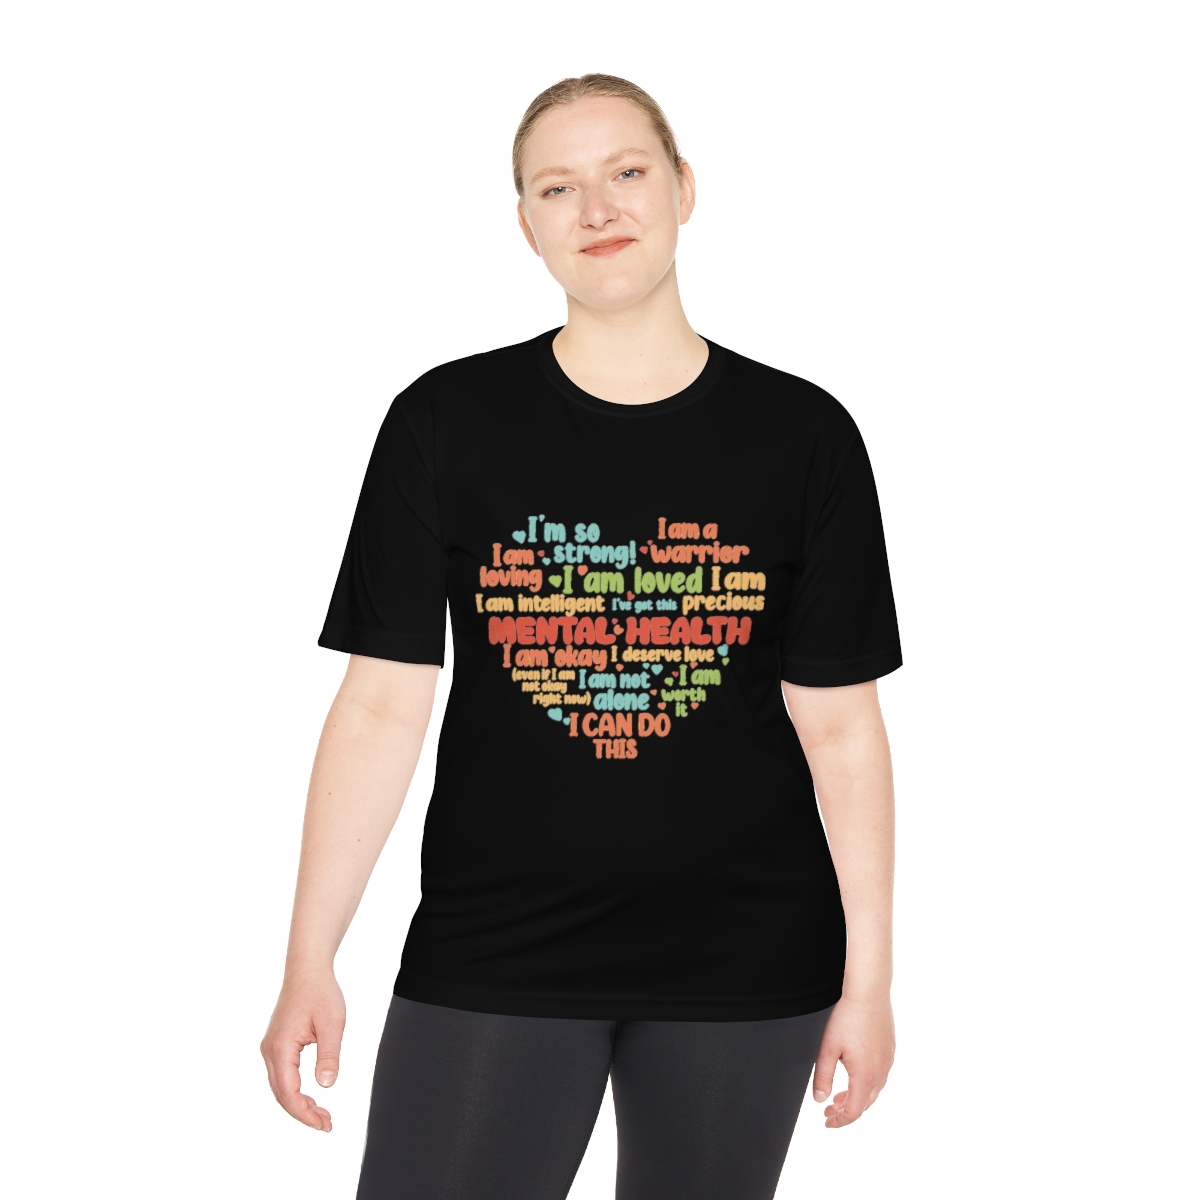 Inspirational and Motivational Recovery T-shirt is All About Self-Love! #gymwear #athletic #exercise product main image